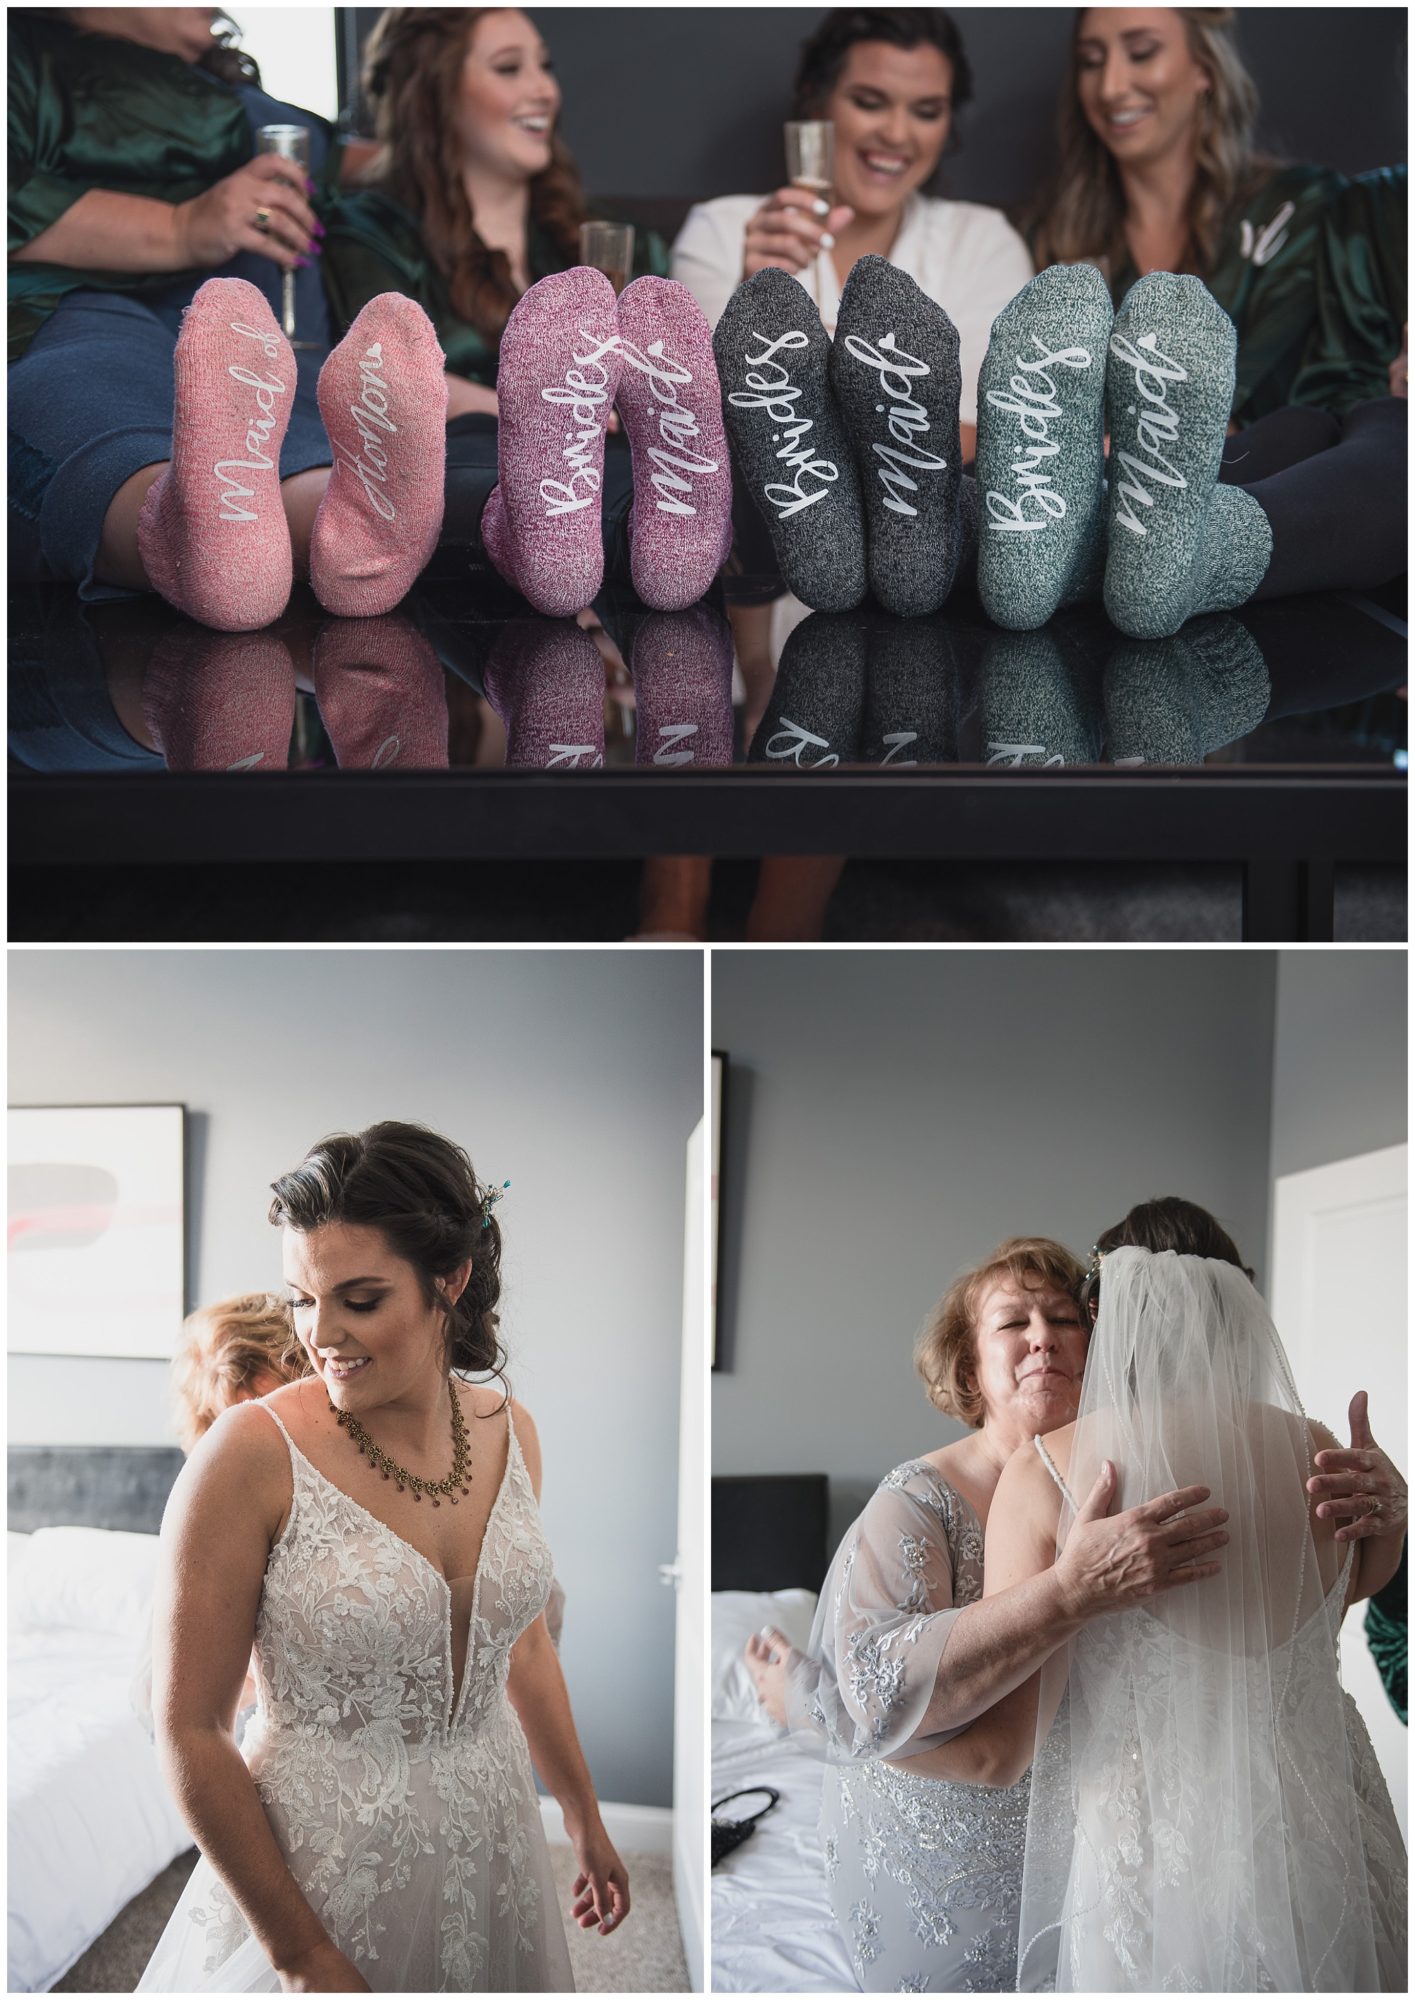 Top: Bridal Party wearing personalized socks, Bottom left: Bride getting ready, Bottom right: Mom and bride hugging